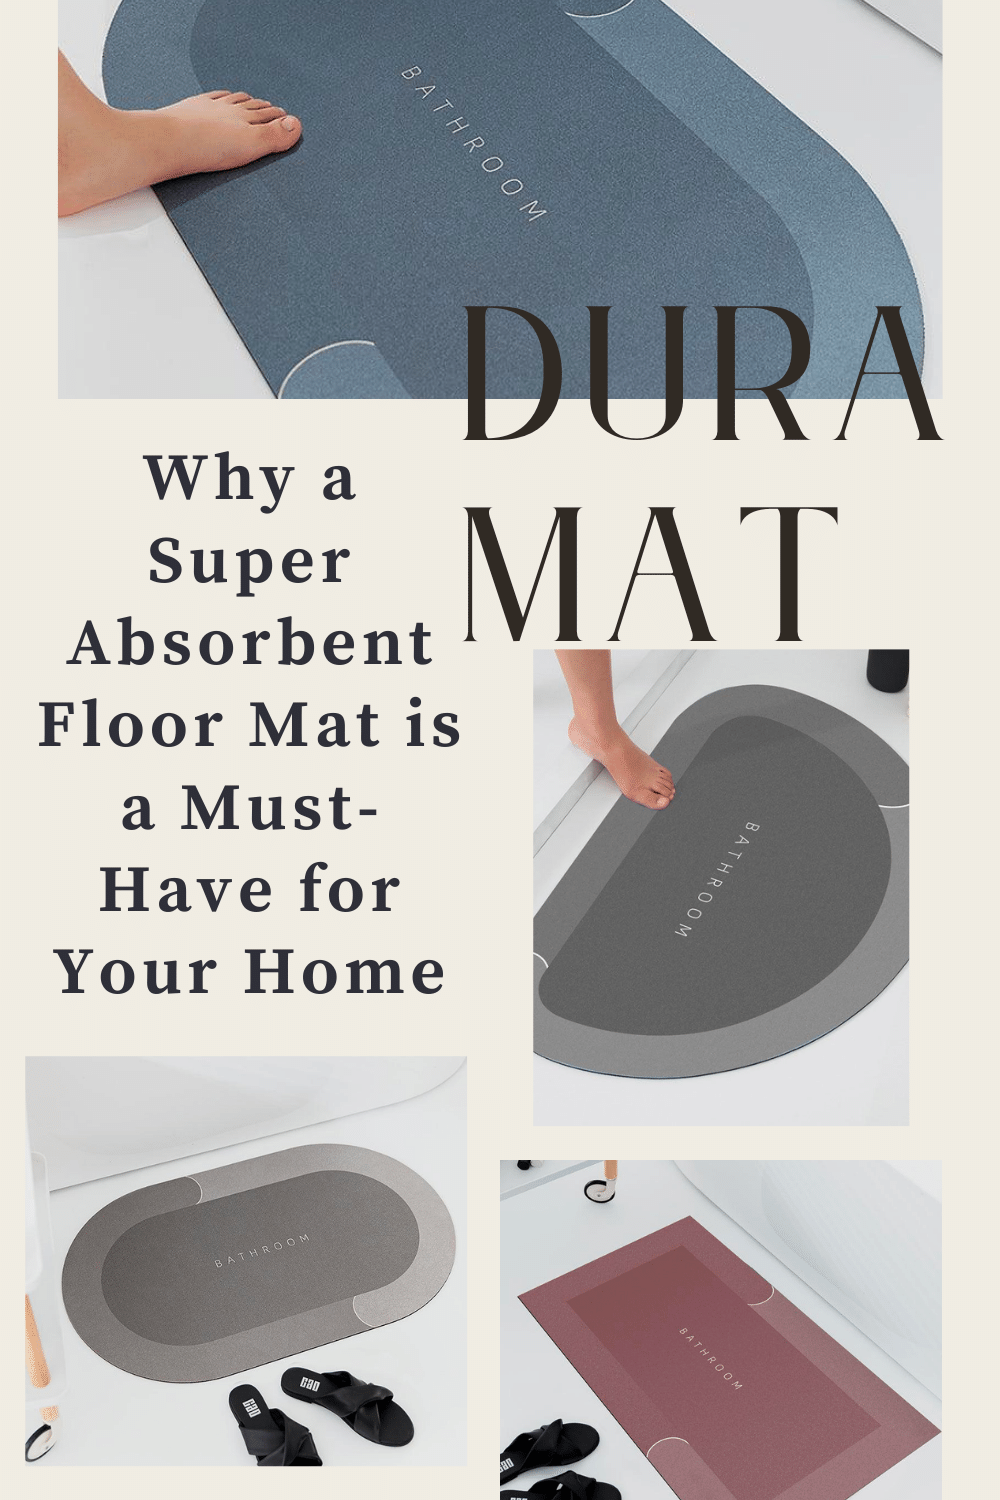 Why a Super Absorbent Floor Mat is a Must-Have for Your Home